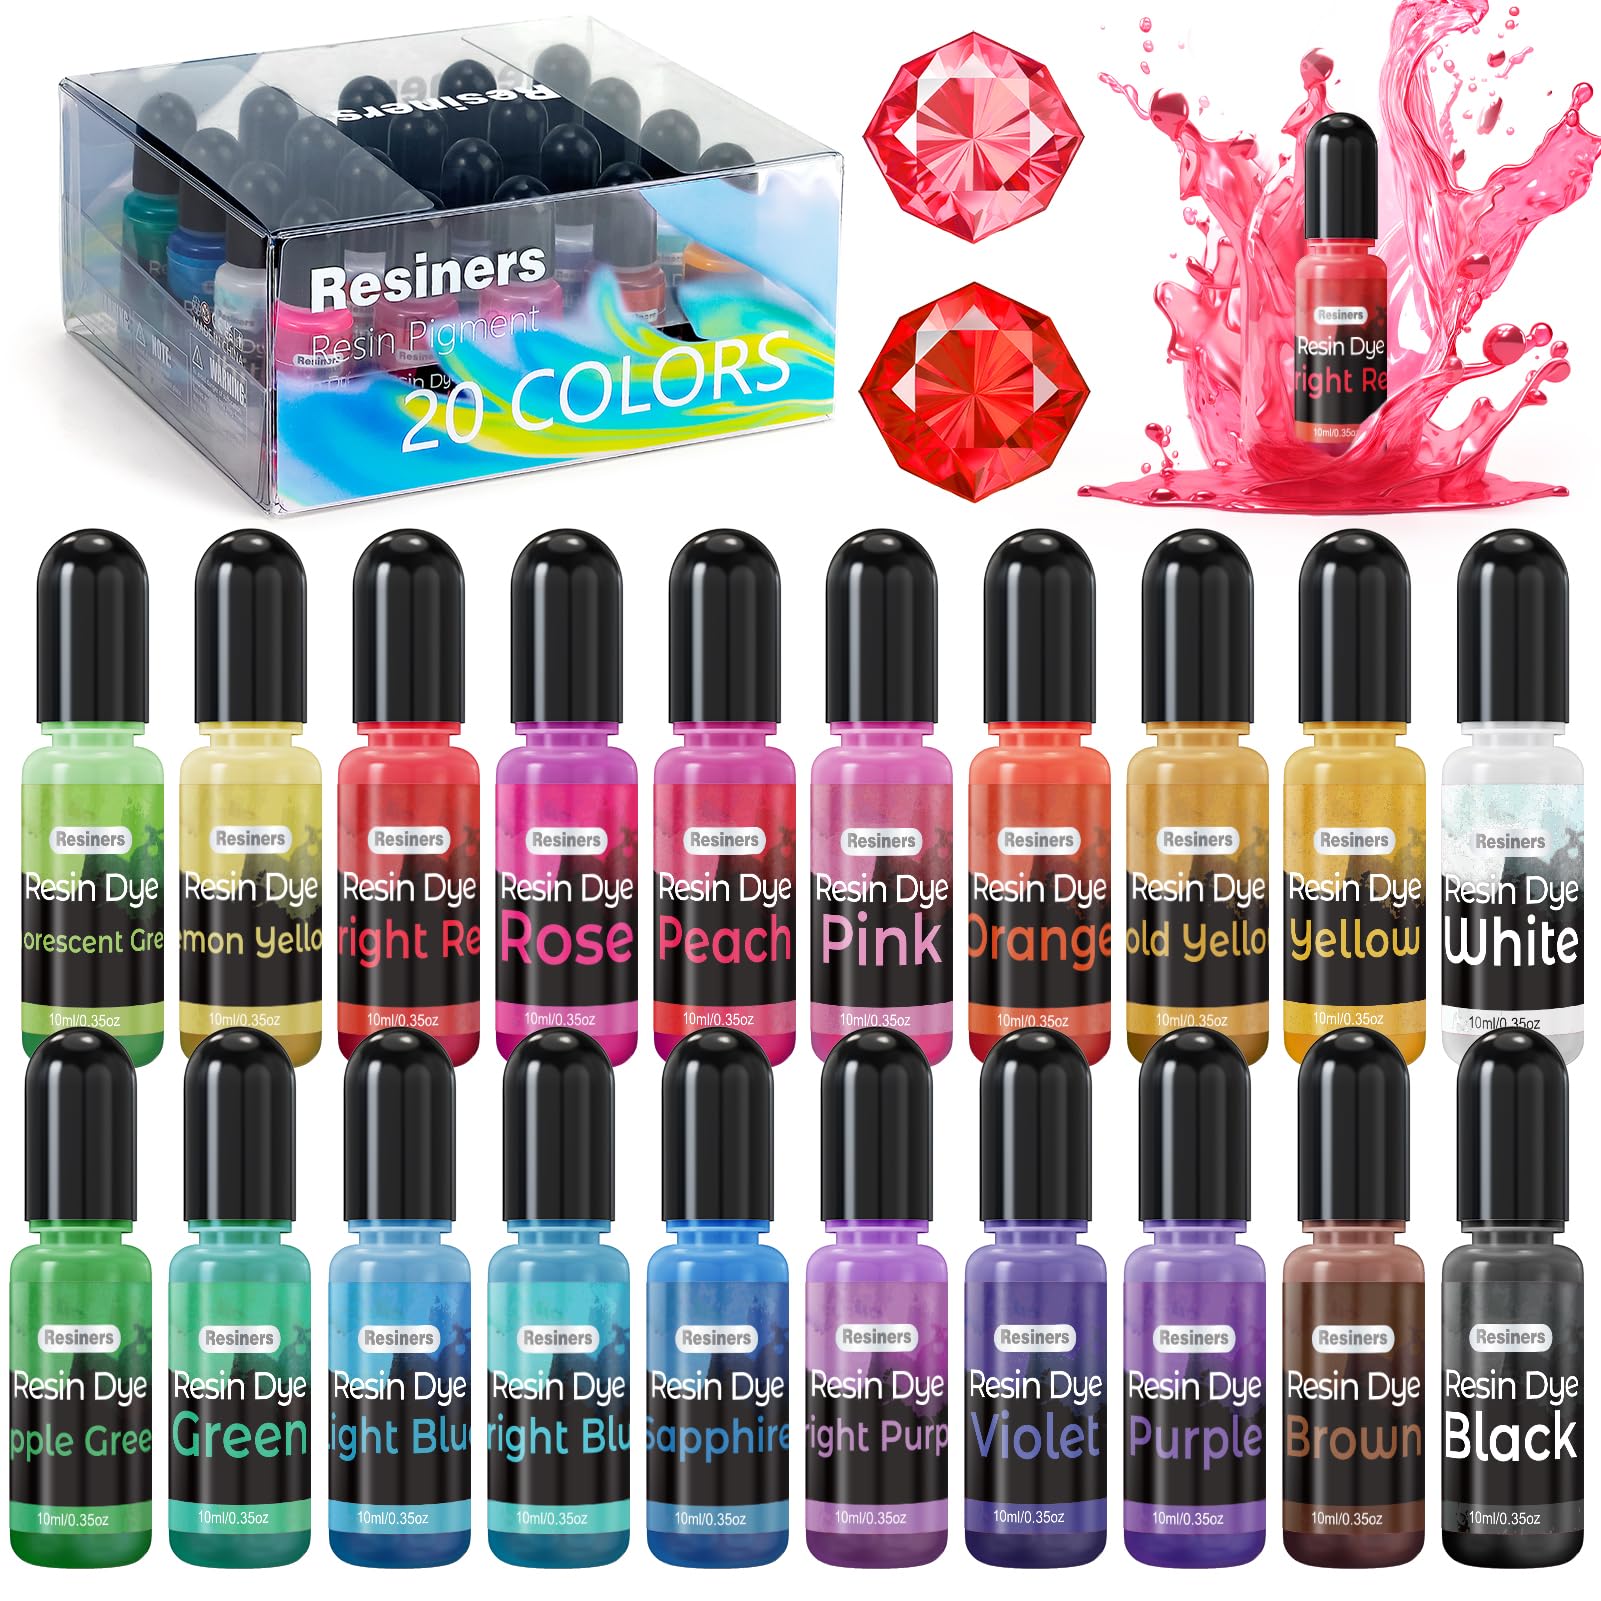 Epoxy Resin Color, 24 Vibrant Colors Resin Pigment Liquid - High  Concentrated Resin Color Pigment, Epoxy Resin Dye Paint for Jewelry Making,  DIY Resin Crafts : : Home